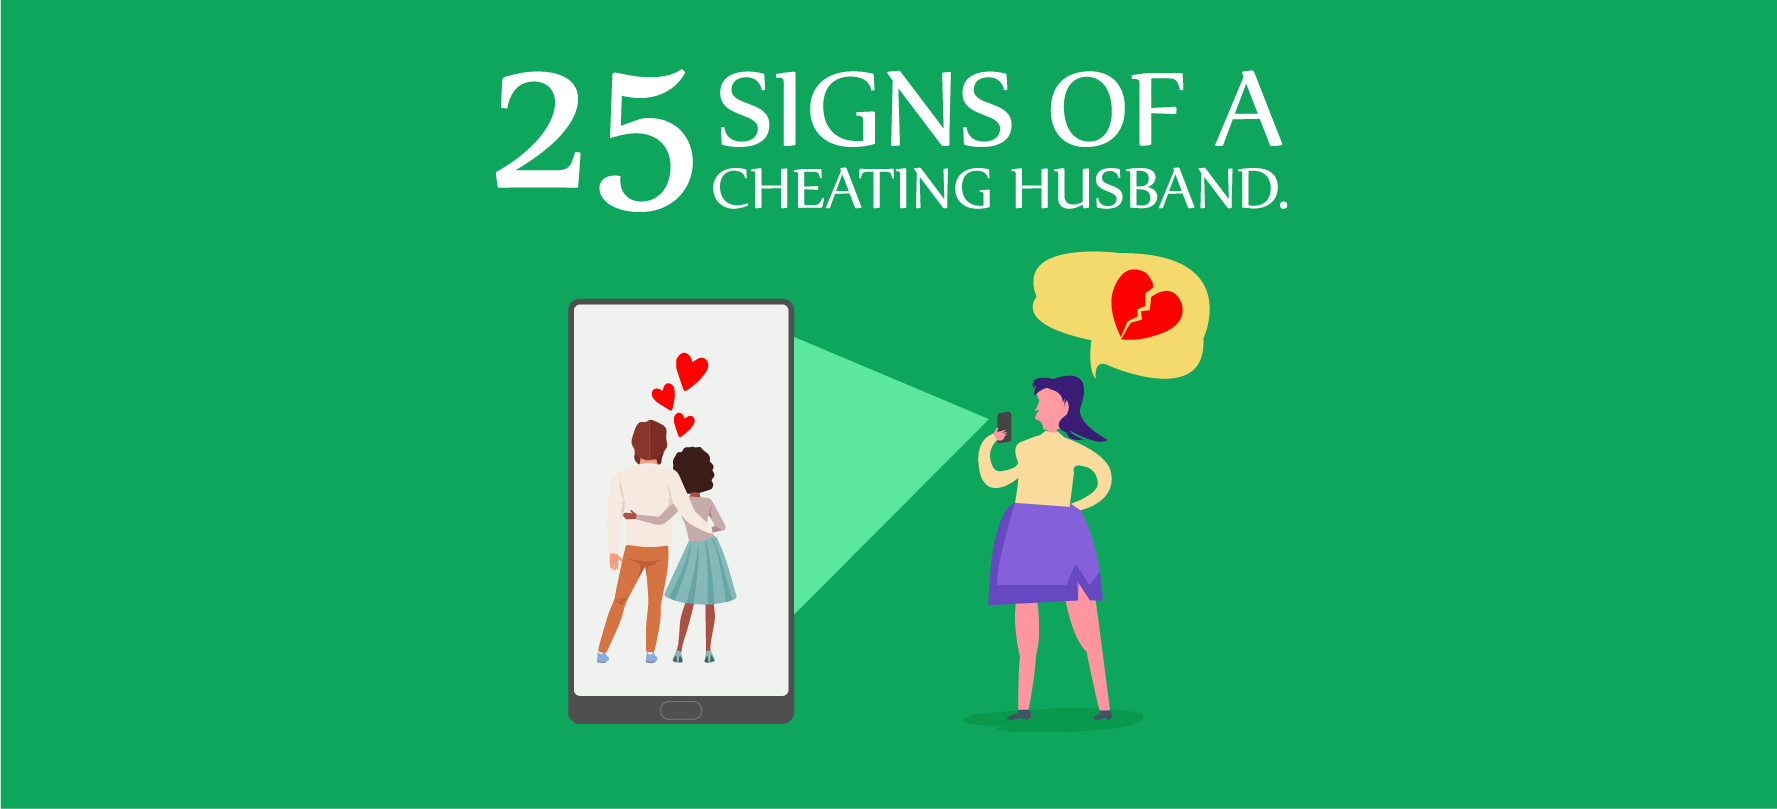 Signs of a Cheating Husband